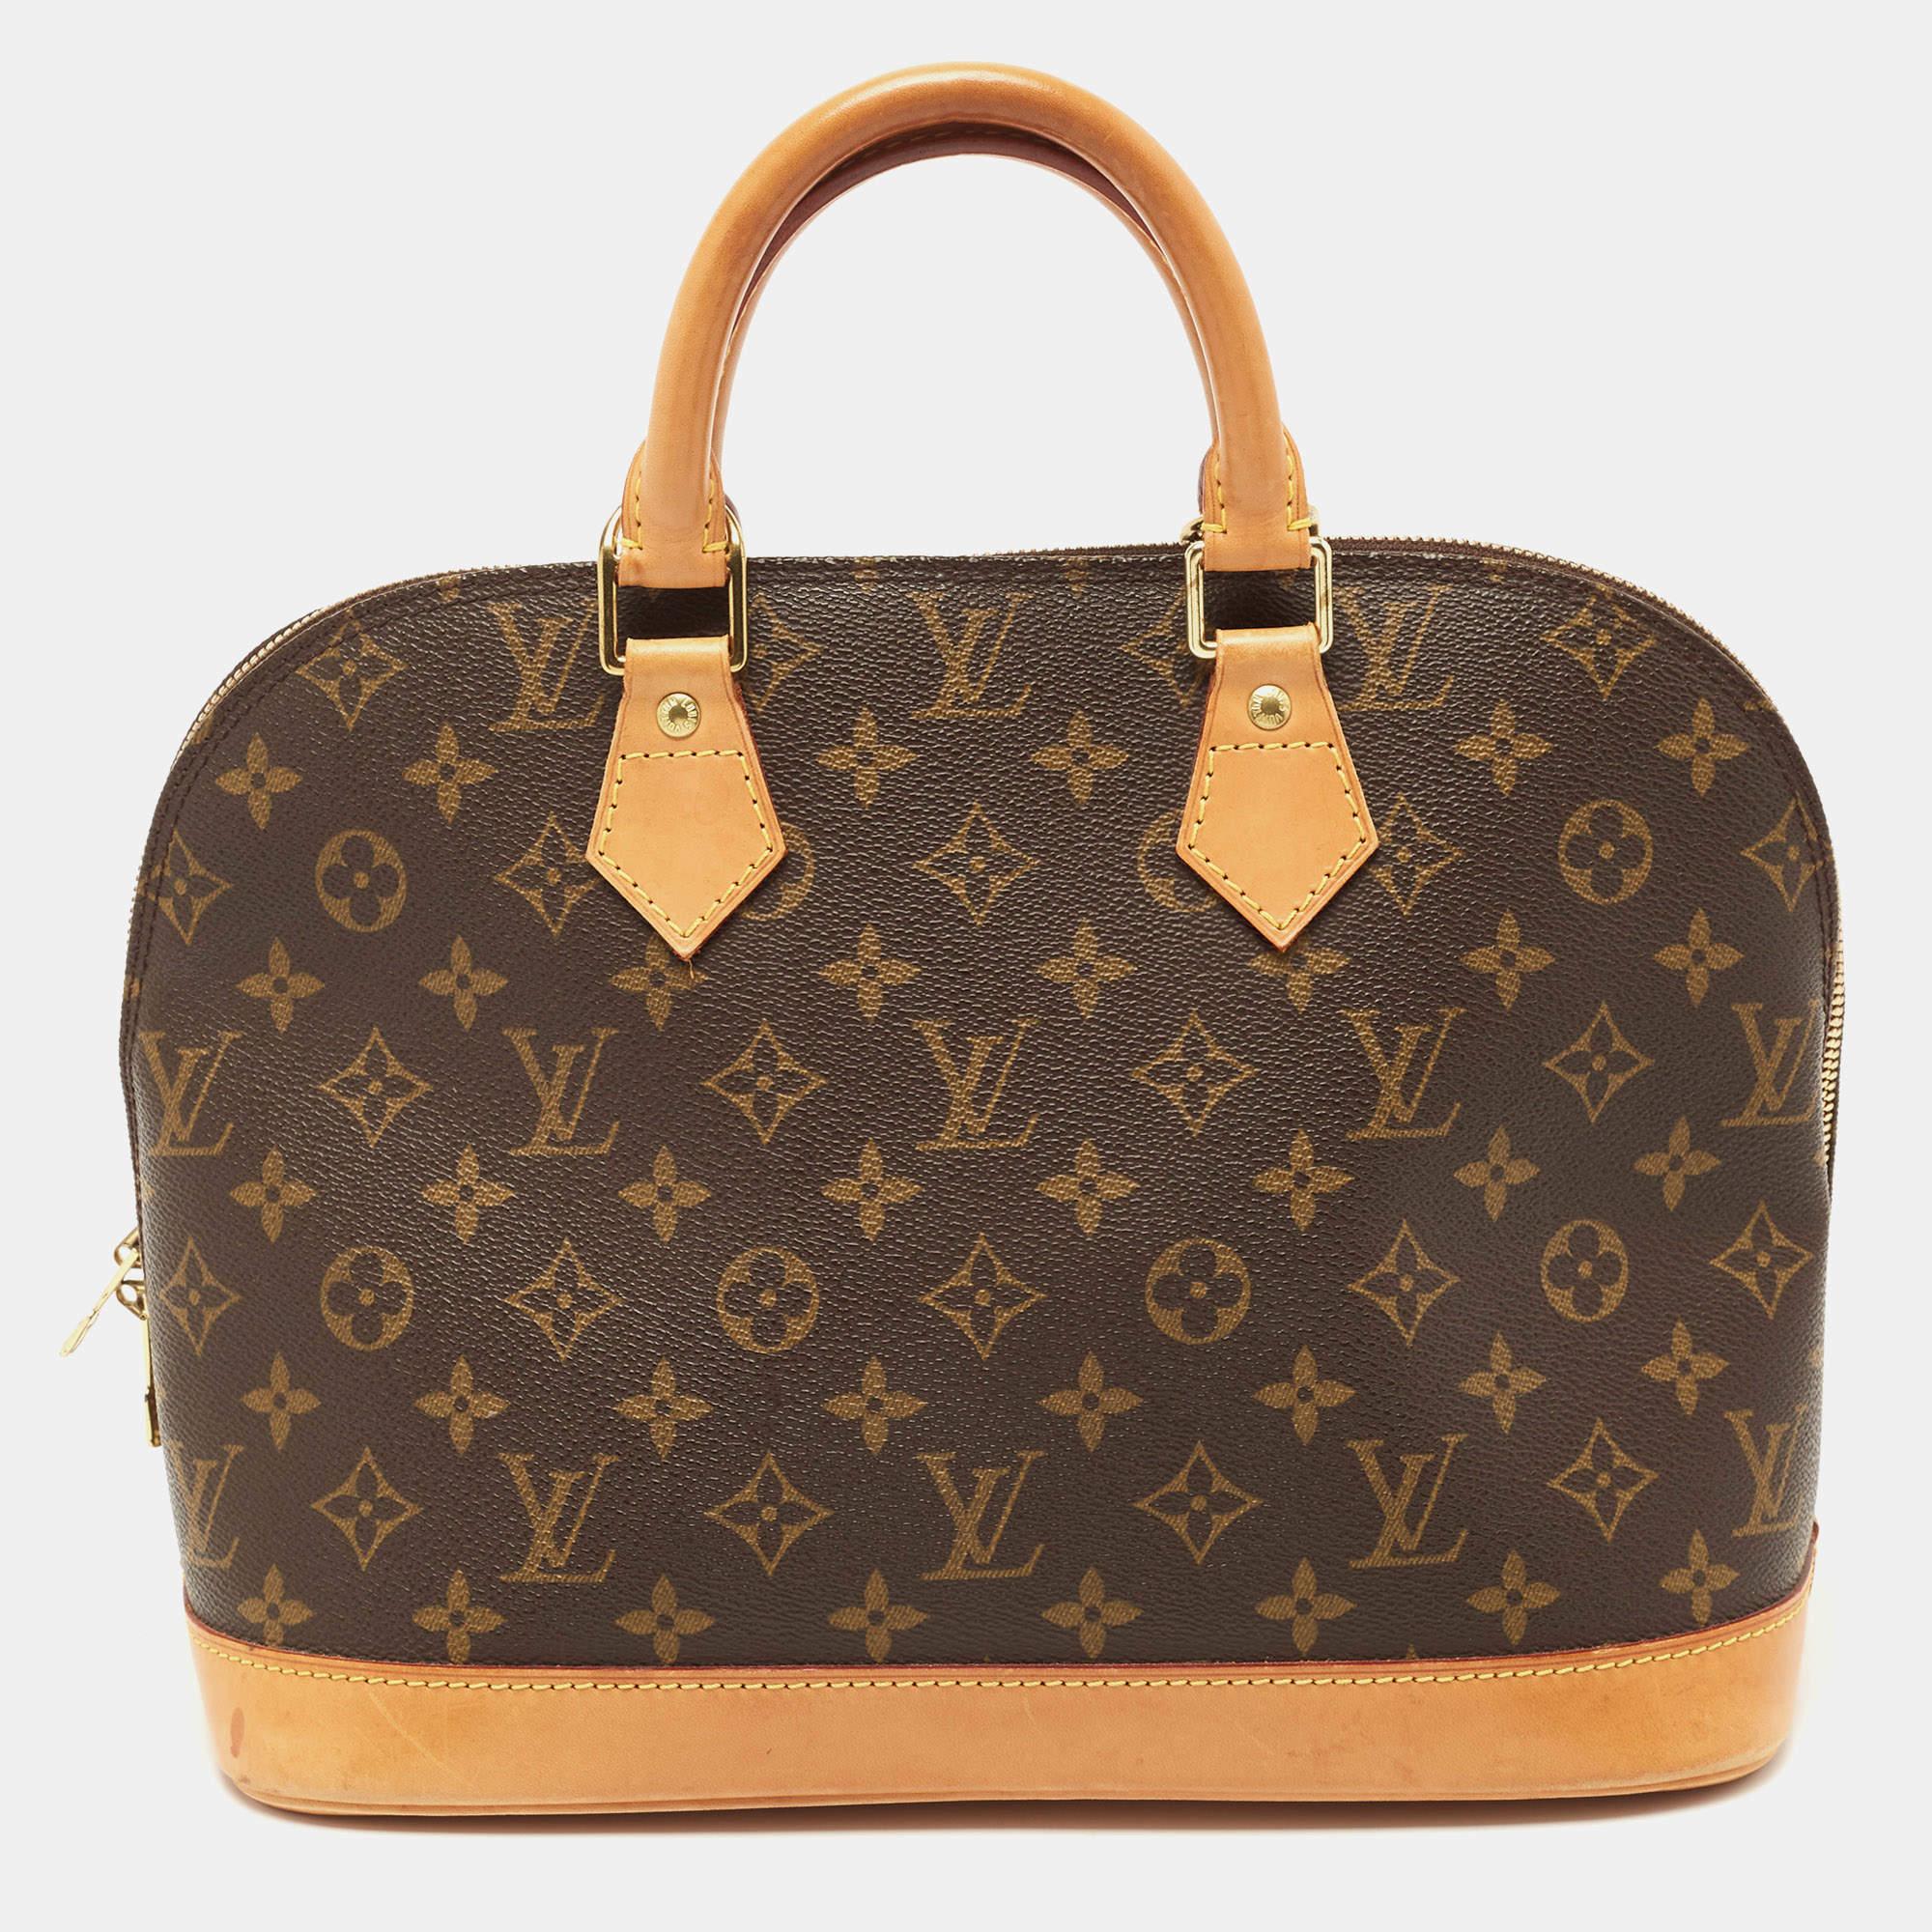 Introduced by Gaston-Louis Vuitton in 1934, the Louis Vuitton Alma is defined by elegant curves and notable features. From one of the most iconic collections of Louis Vuitton, this PM bag is imbued with exquisite craftsmanship and historic details.